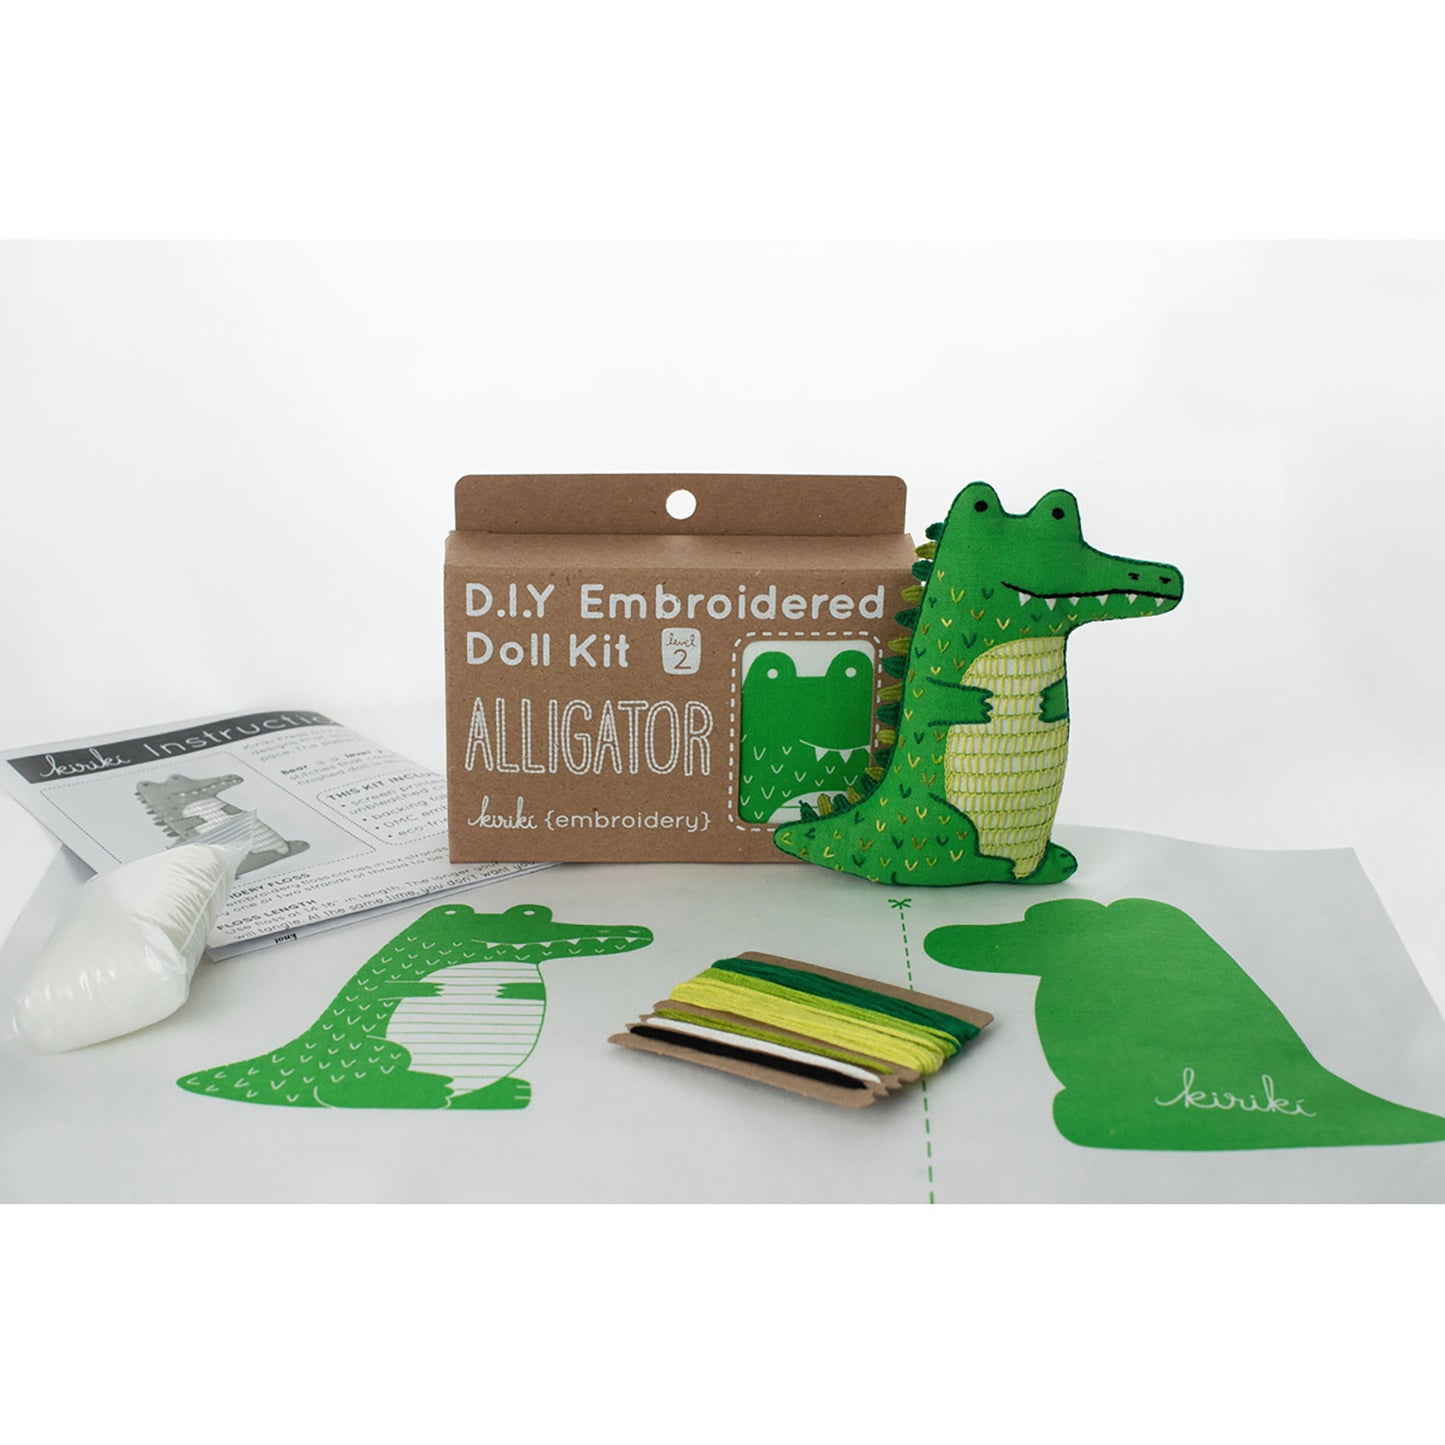 D.I.Y. Embroidered Doll Kit - Alligator Alternative View #2